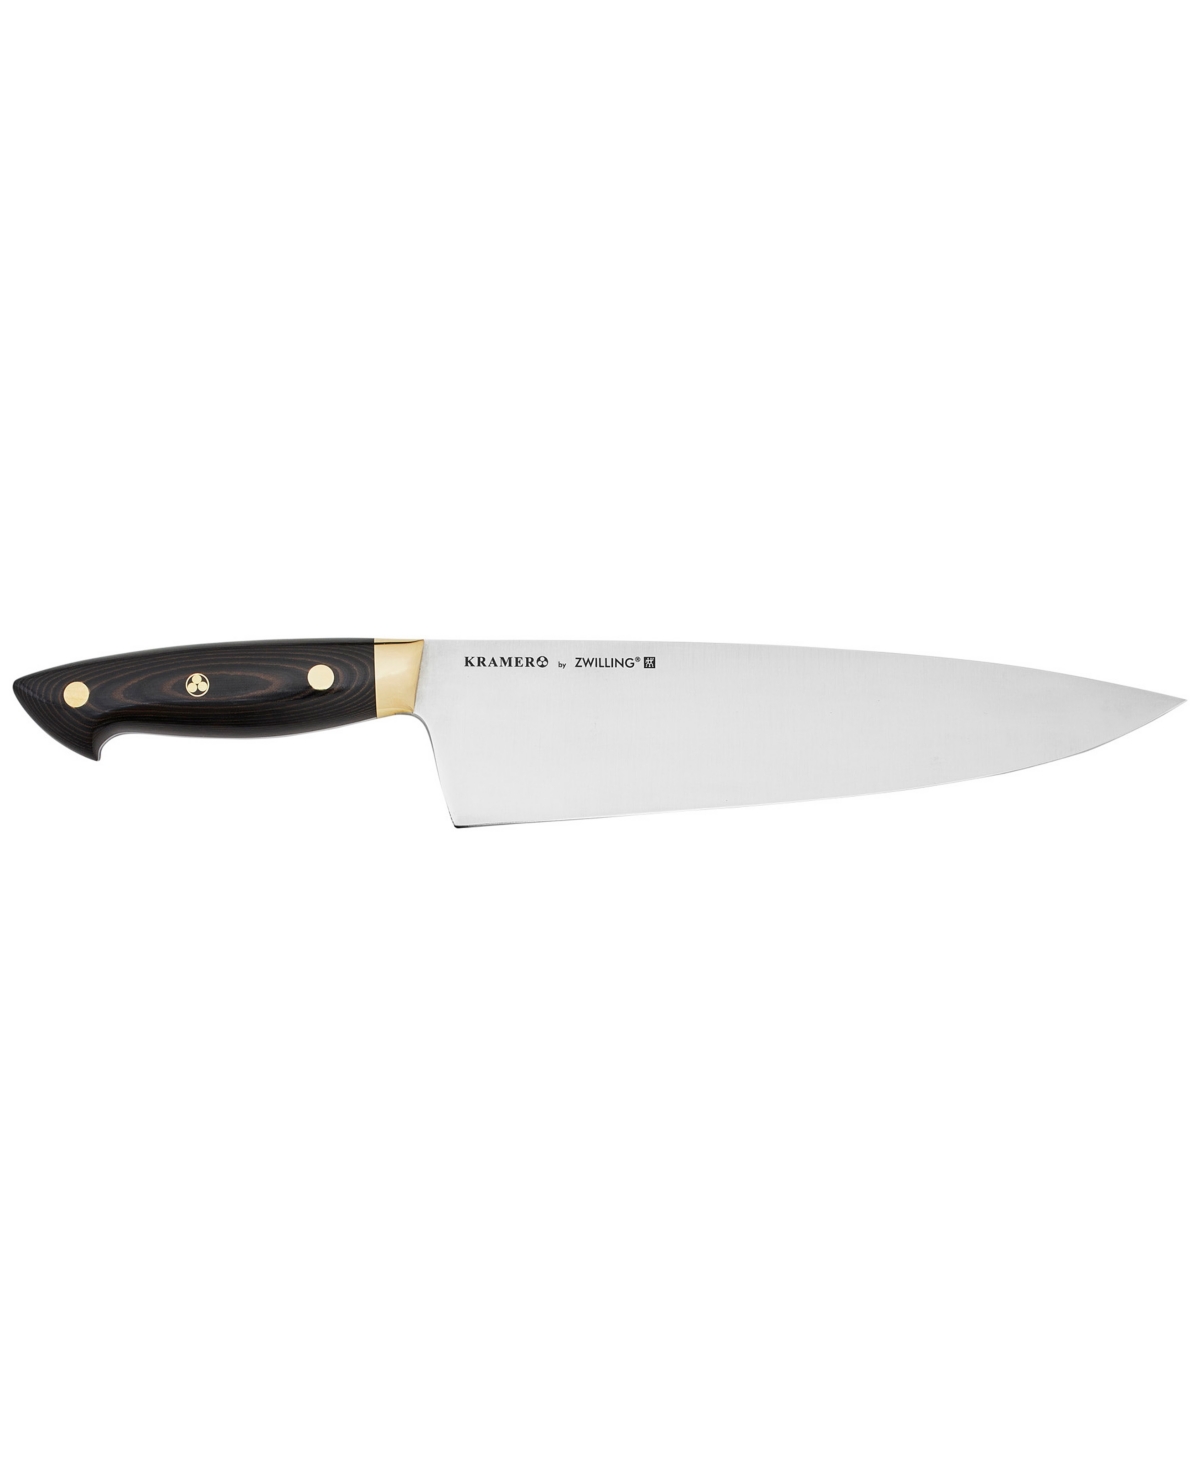 Zwilling Bob Kramer Carbon 2.0 Chef's Knife, 10" In Brown And Silver-tone